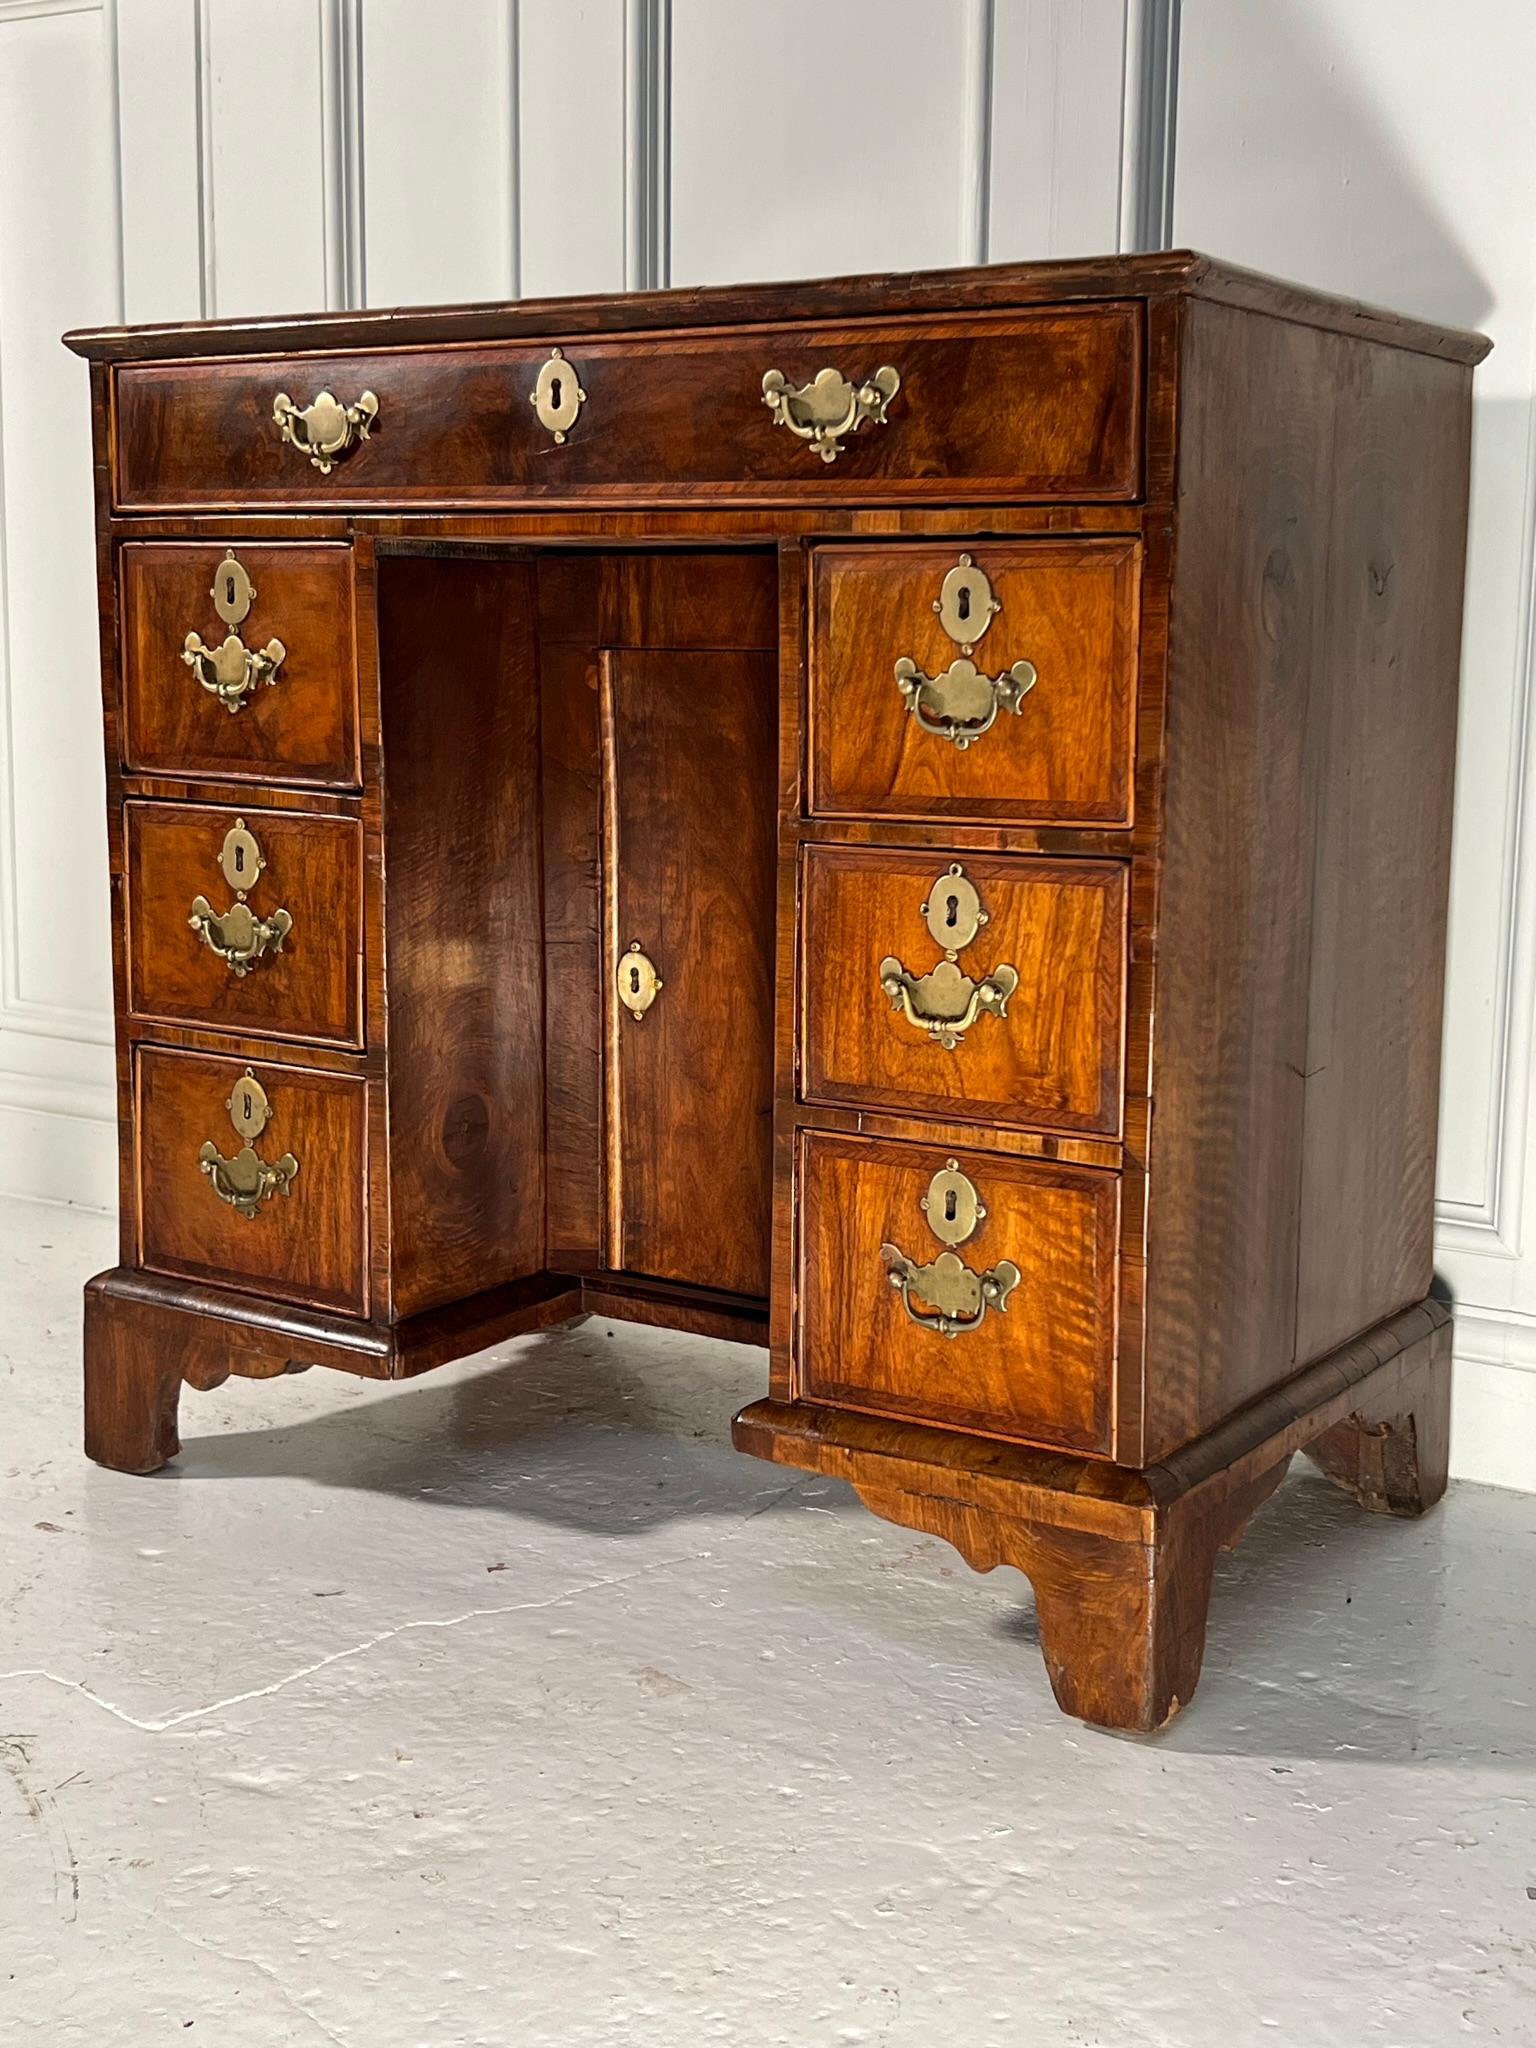 George II walnut knee hole desk.

Cross banded quartered top above an arrangement of drawers and a central cupboard raised on bracket feet.

Later handles and some repairs to veneers as pictured.

English circa 1760.

Measurements - 77cm h x